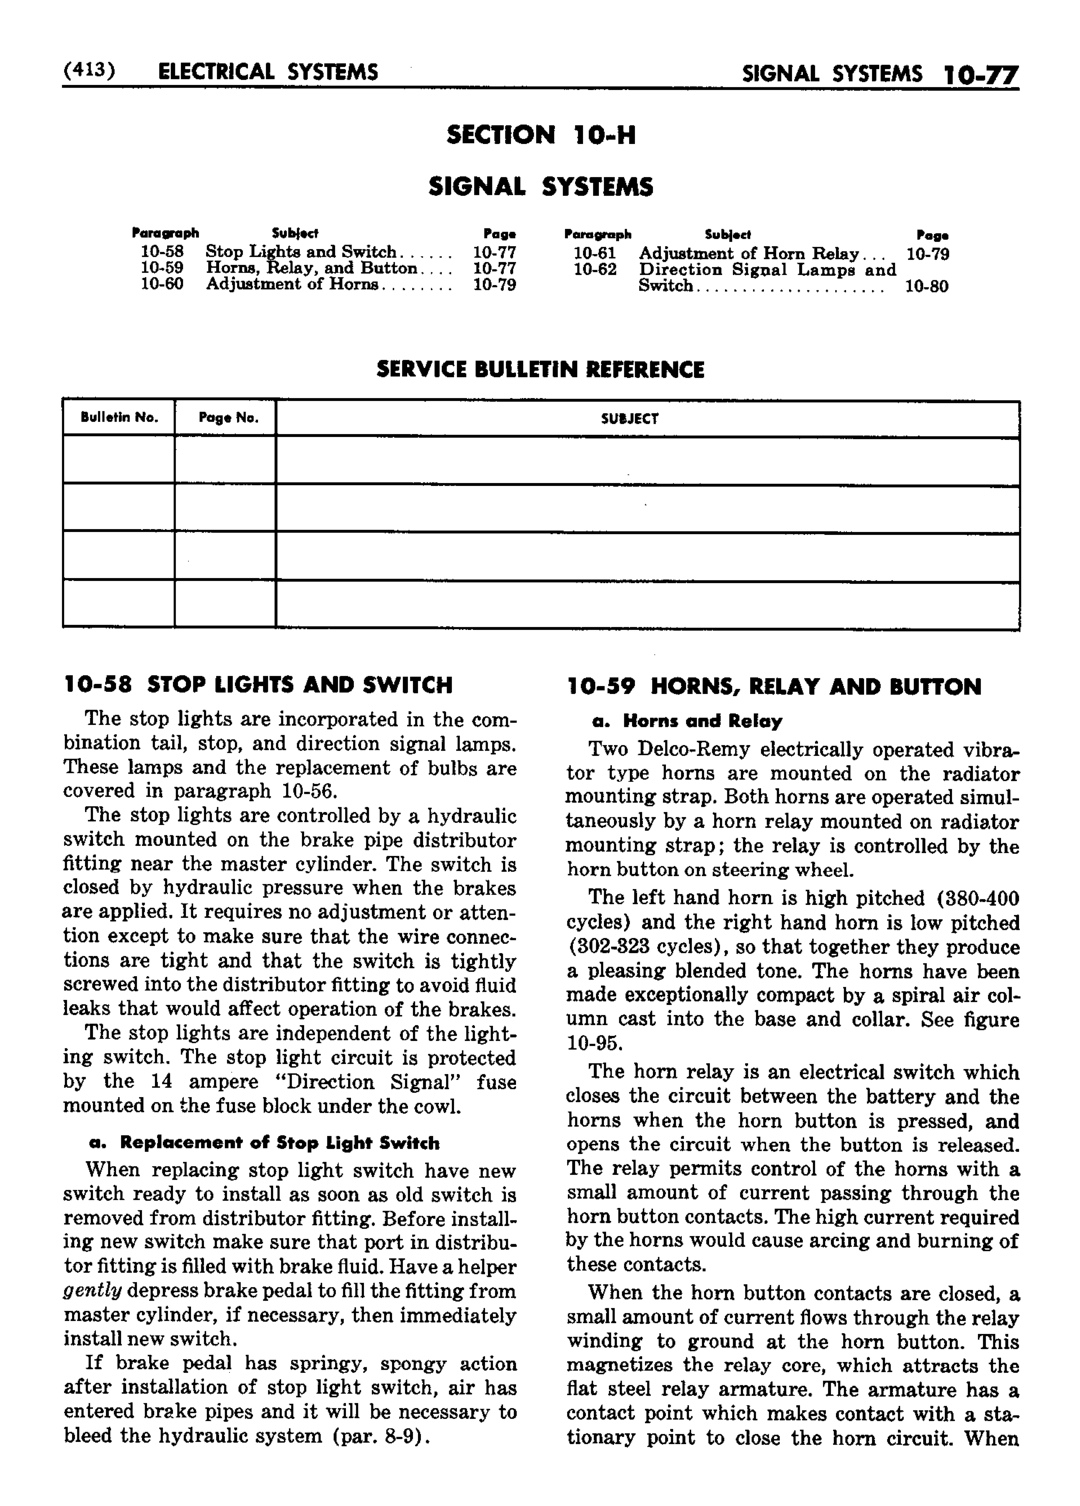 n_11 1952 Buick Shop Manual - Electrical Systems-077-077.jpg